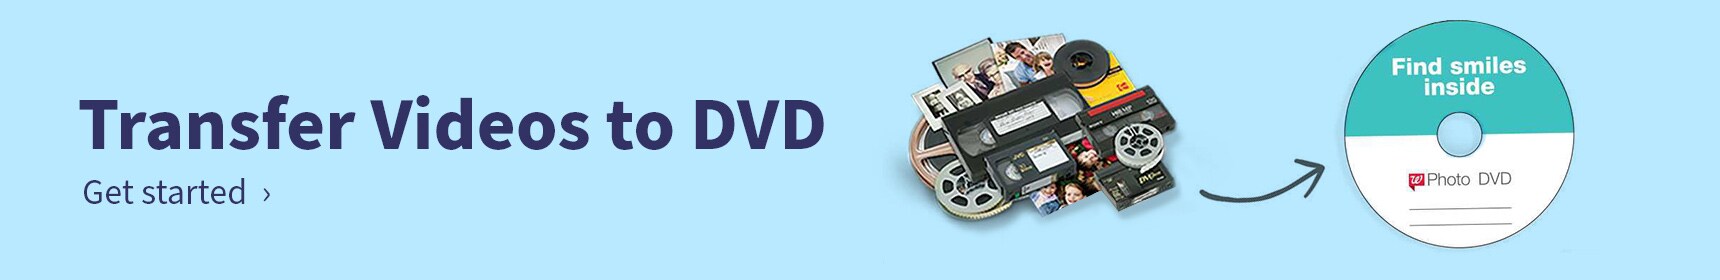 Transfer Videos to DVD. Get started.